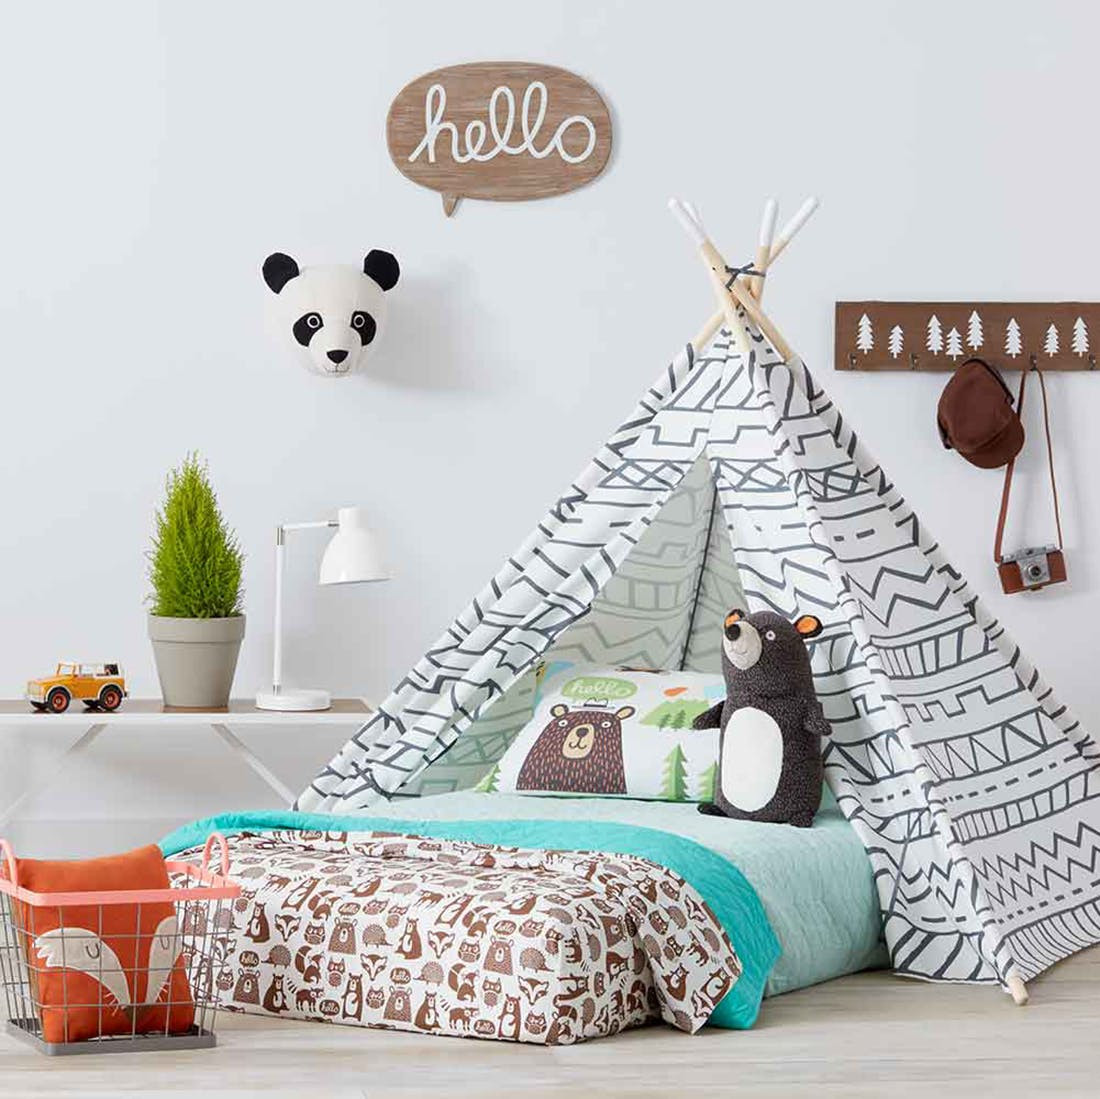 Target Kids Room Decor
 Tar ’s New Gender Neutral Kids’ Decor Line Might Be the